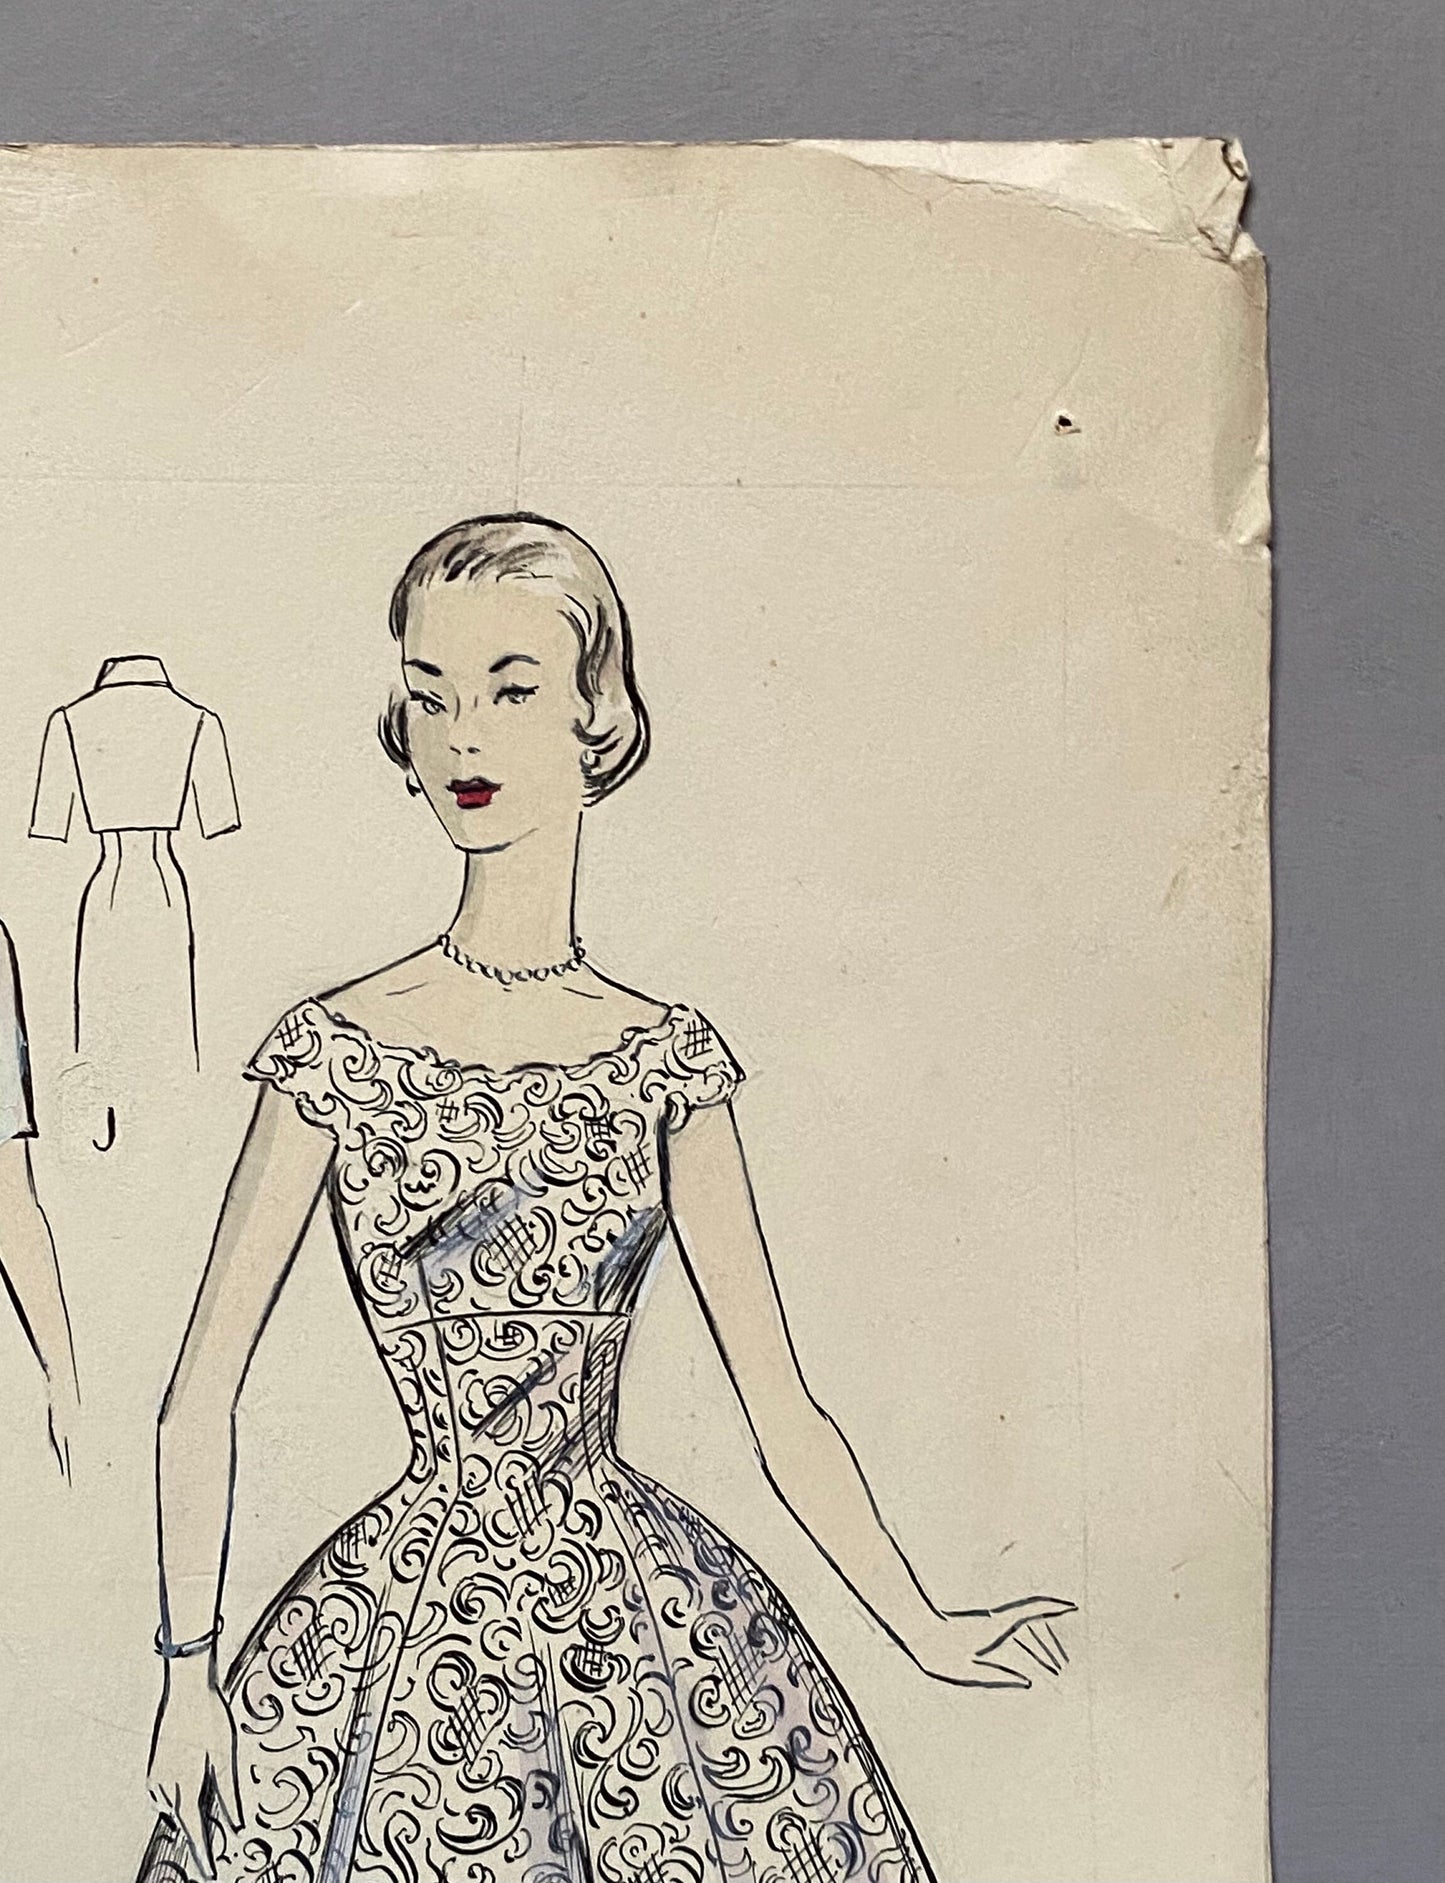 A Large Hand Drawn and Hand Painted Fashion Illustration. Spanish. From Barcelona. 1957 - 58. Size: 52 x 41.5 cms.